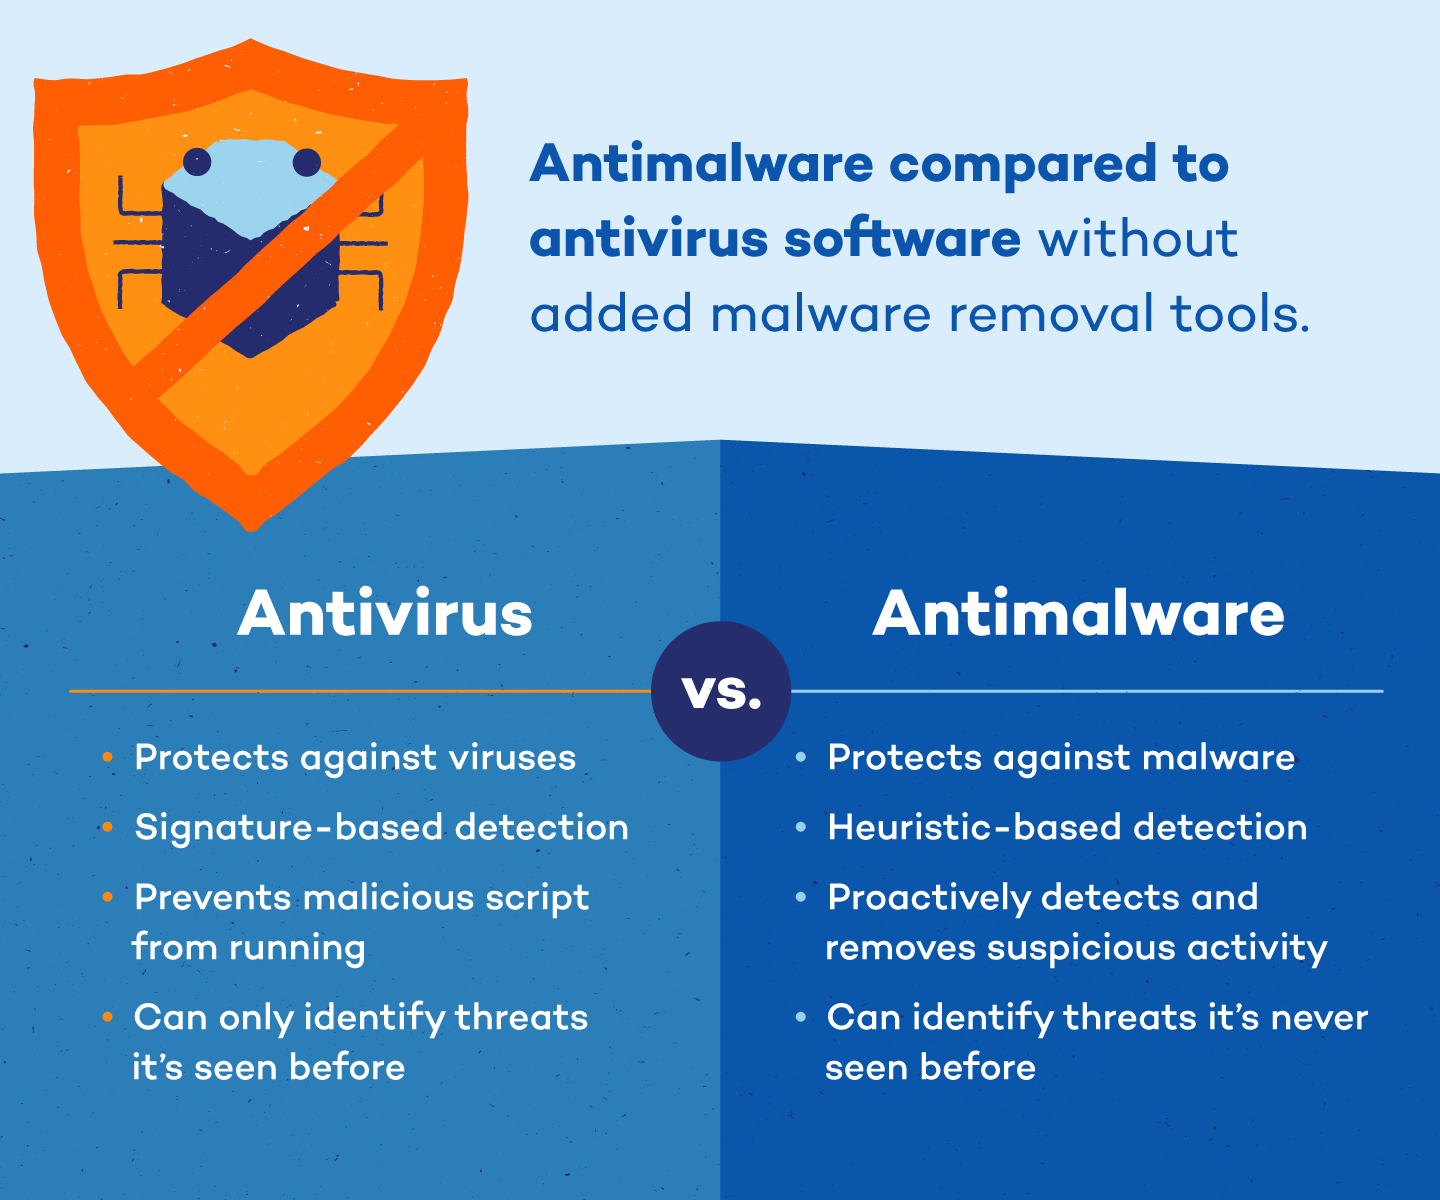 Use a reputable antivirus or antimalware program to scan your computer for any malicious software or infections.
If any threats are detected, follow the recommended actions provided by the security software to remove or quarantine them.